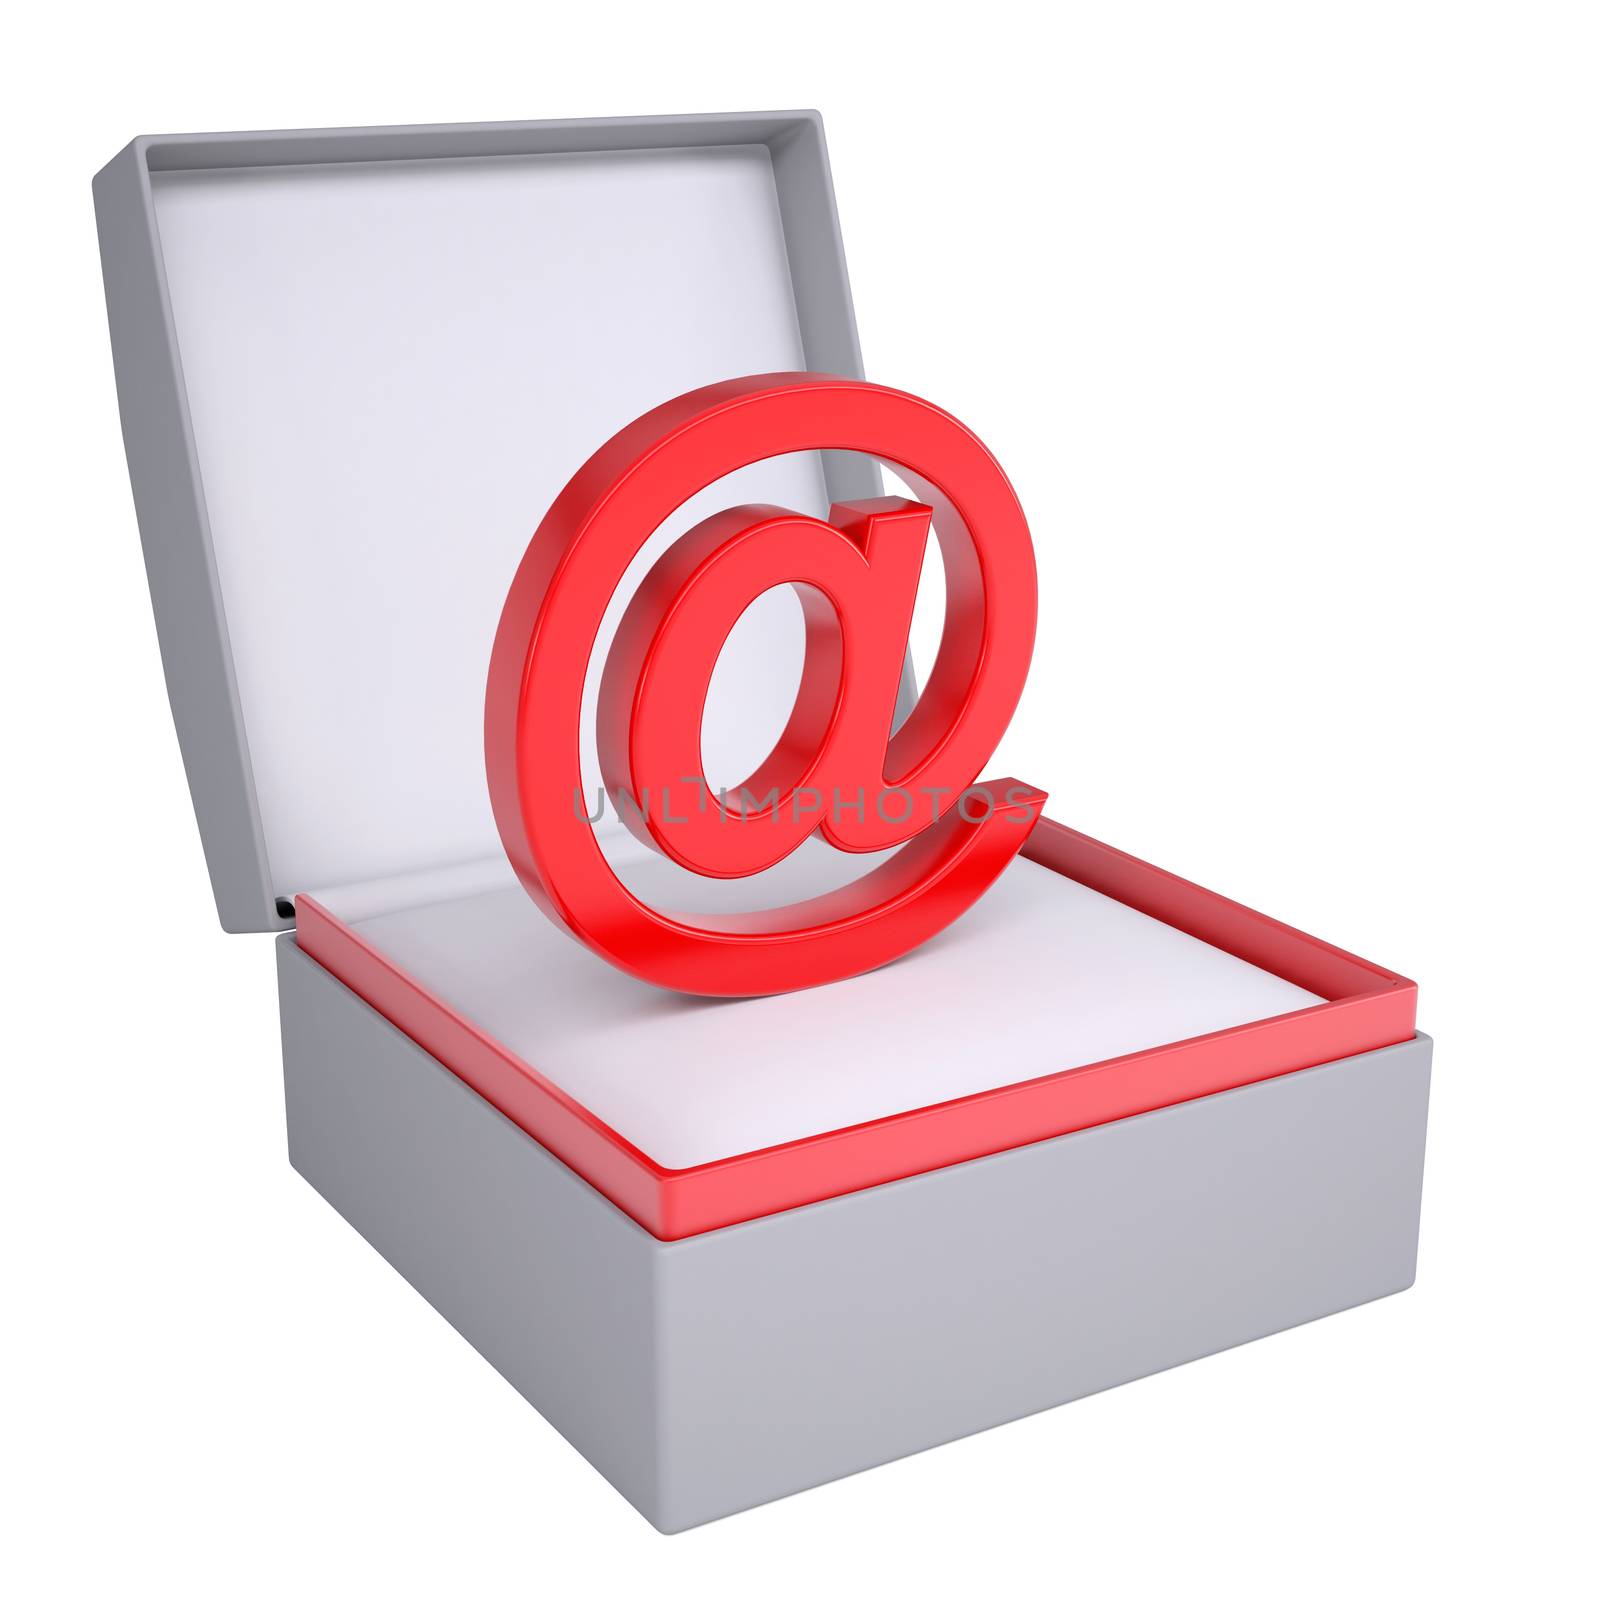 Email sign in open gift box by cherezoff